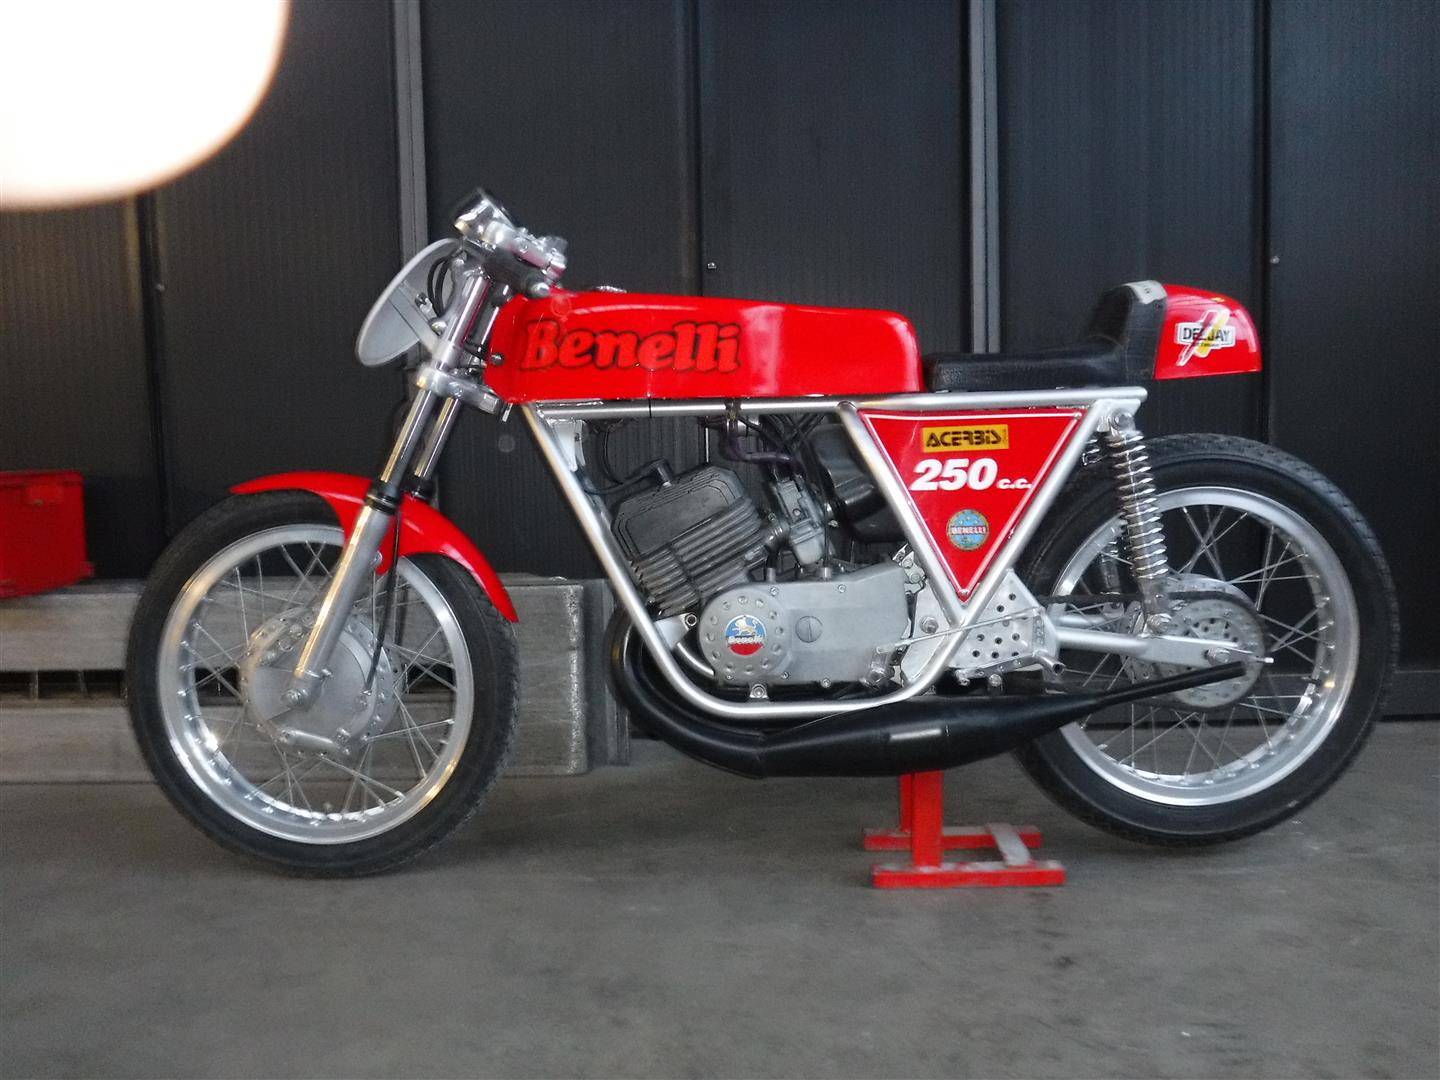 Benelli 250 SS